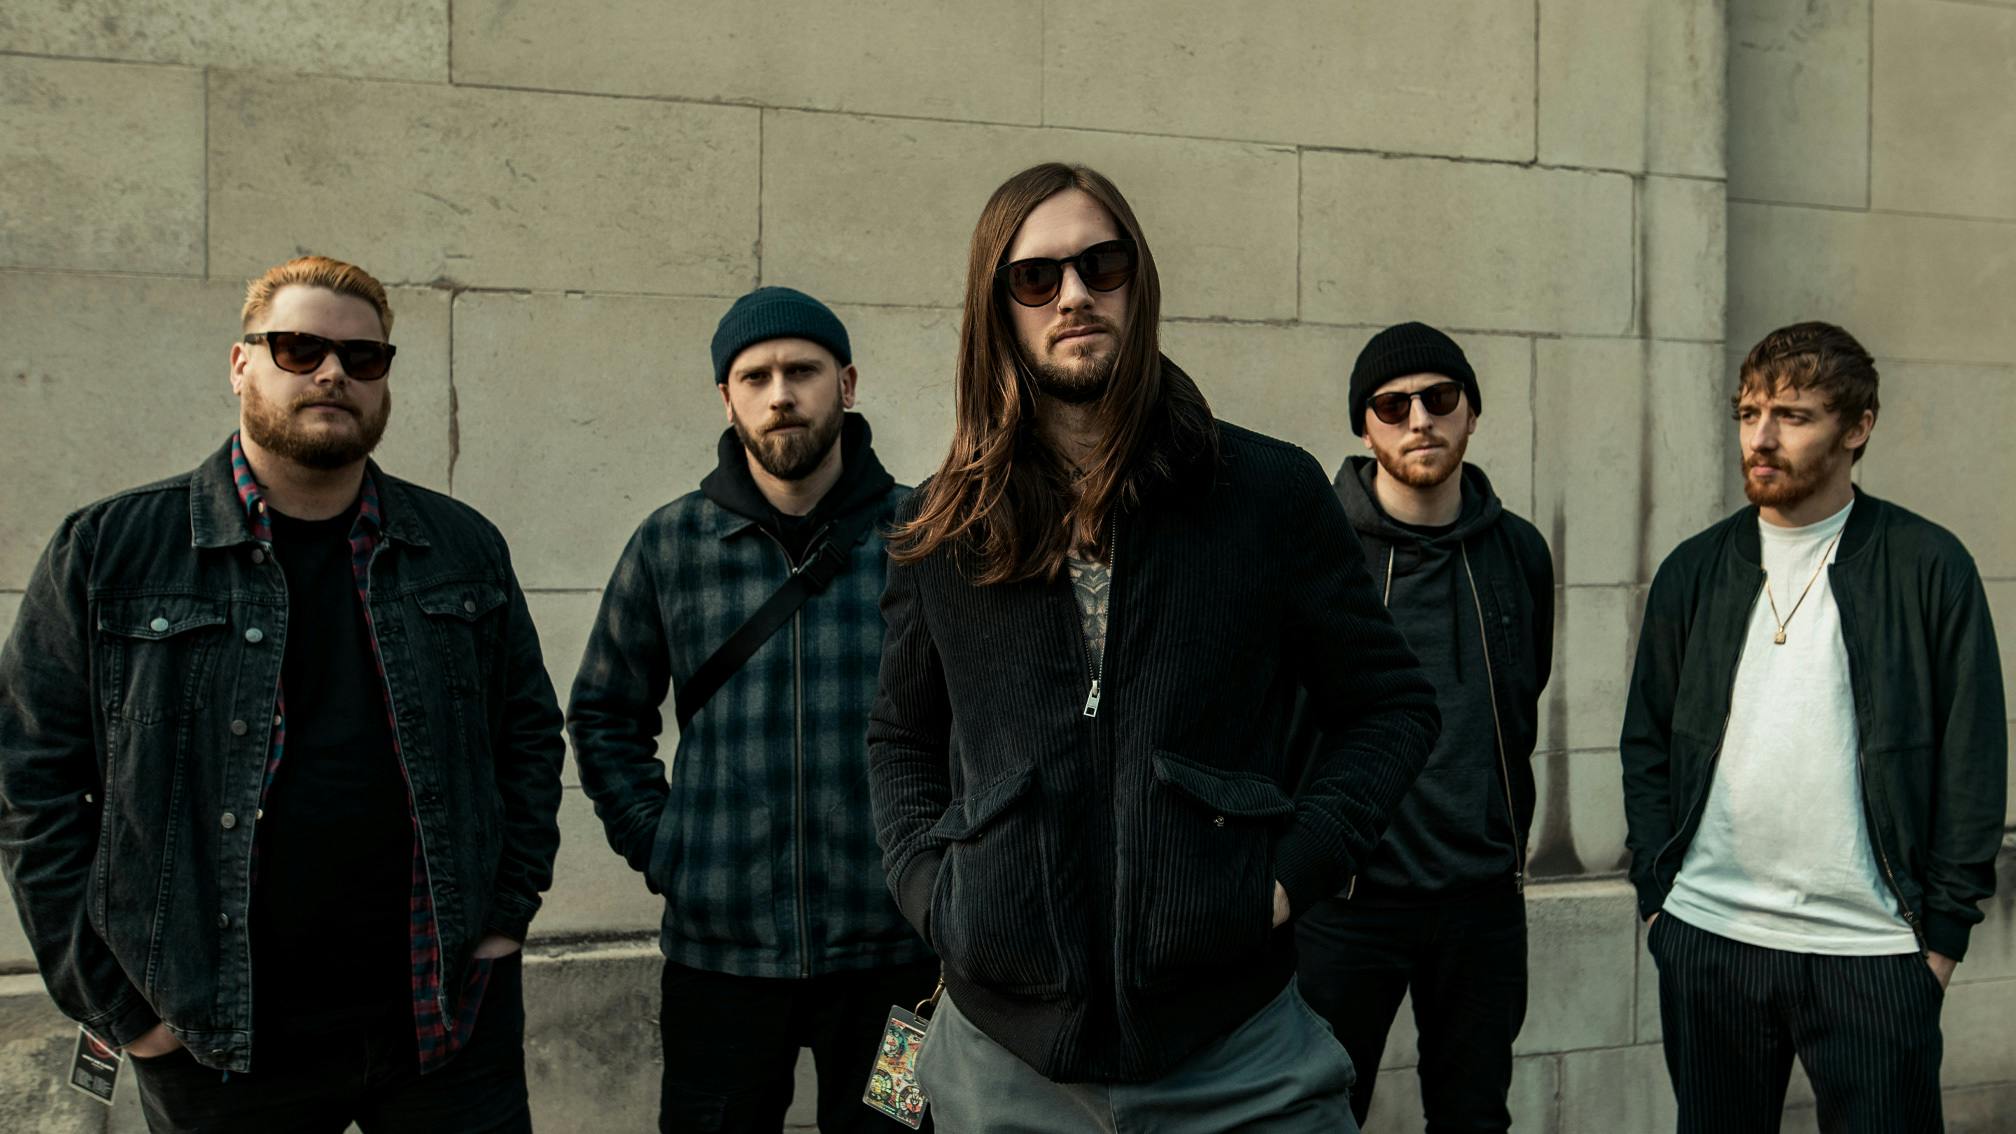 While She Sleeps shunned the album charts to support their friends